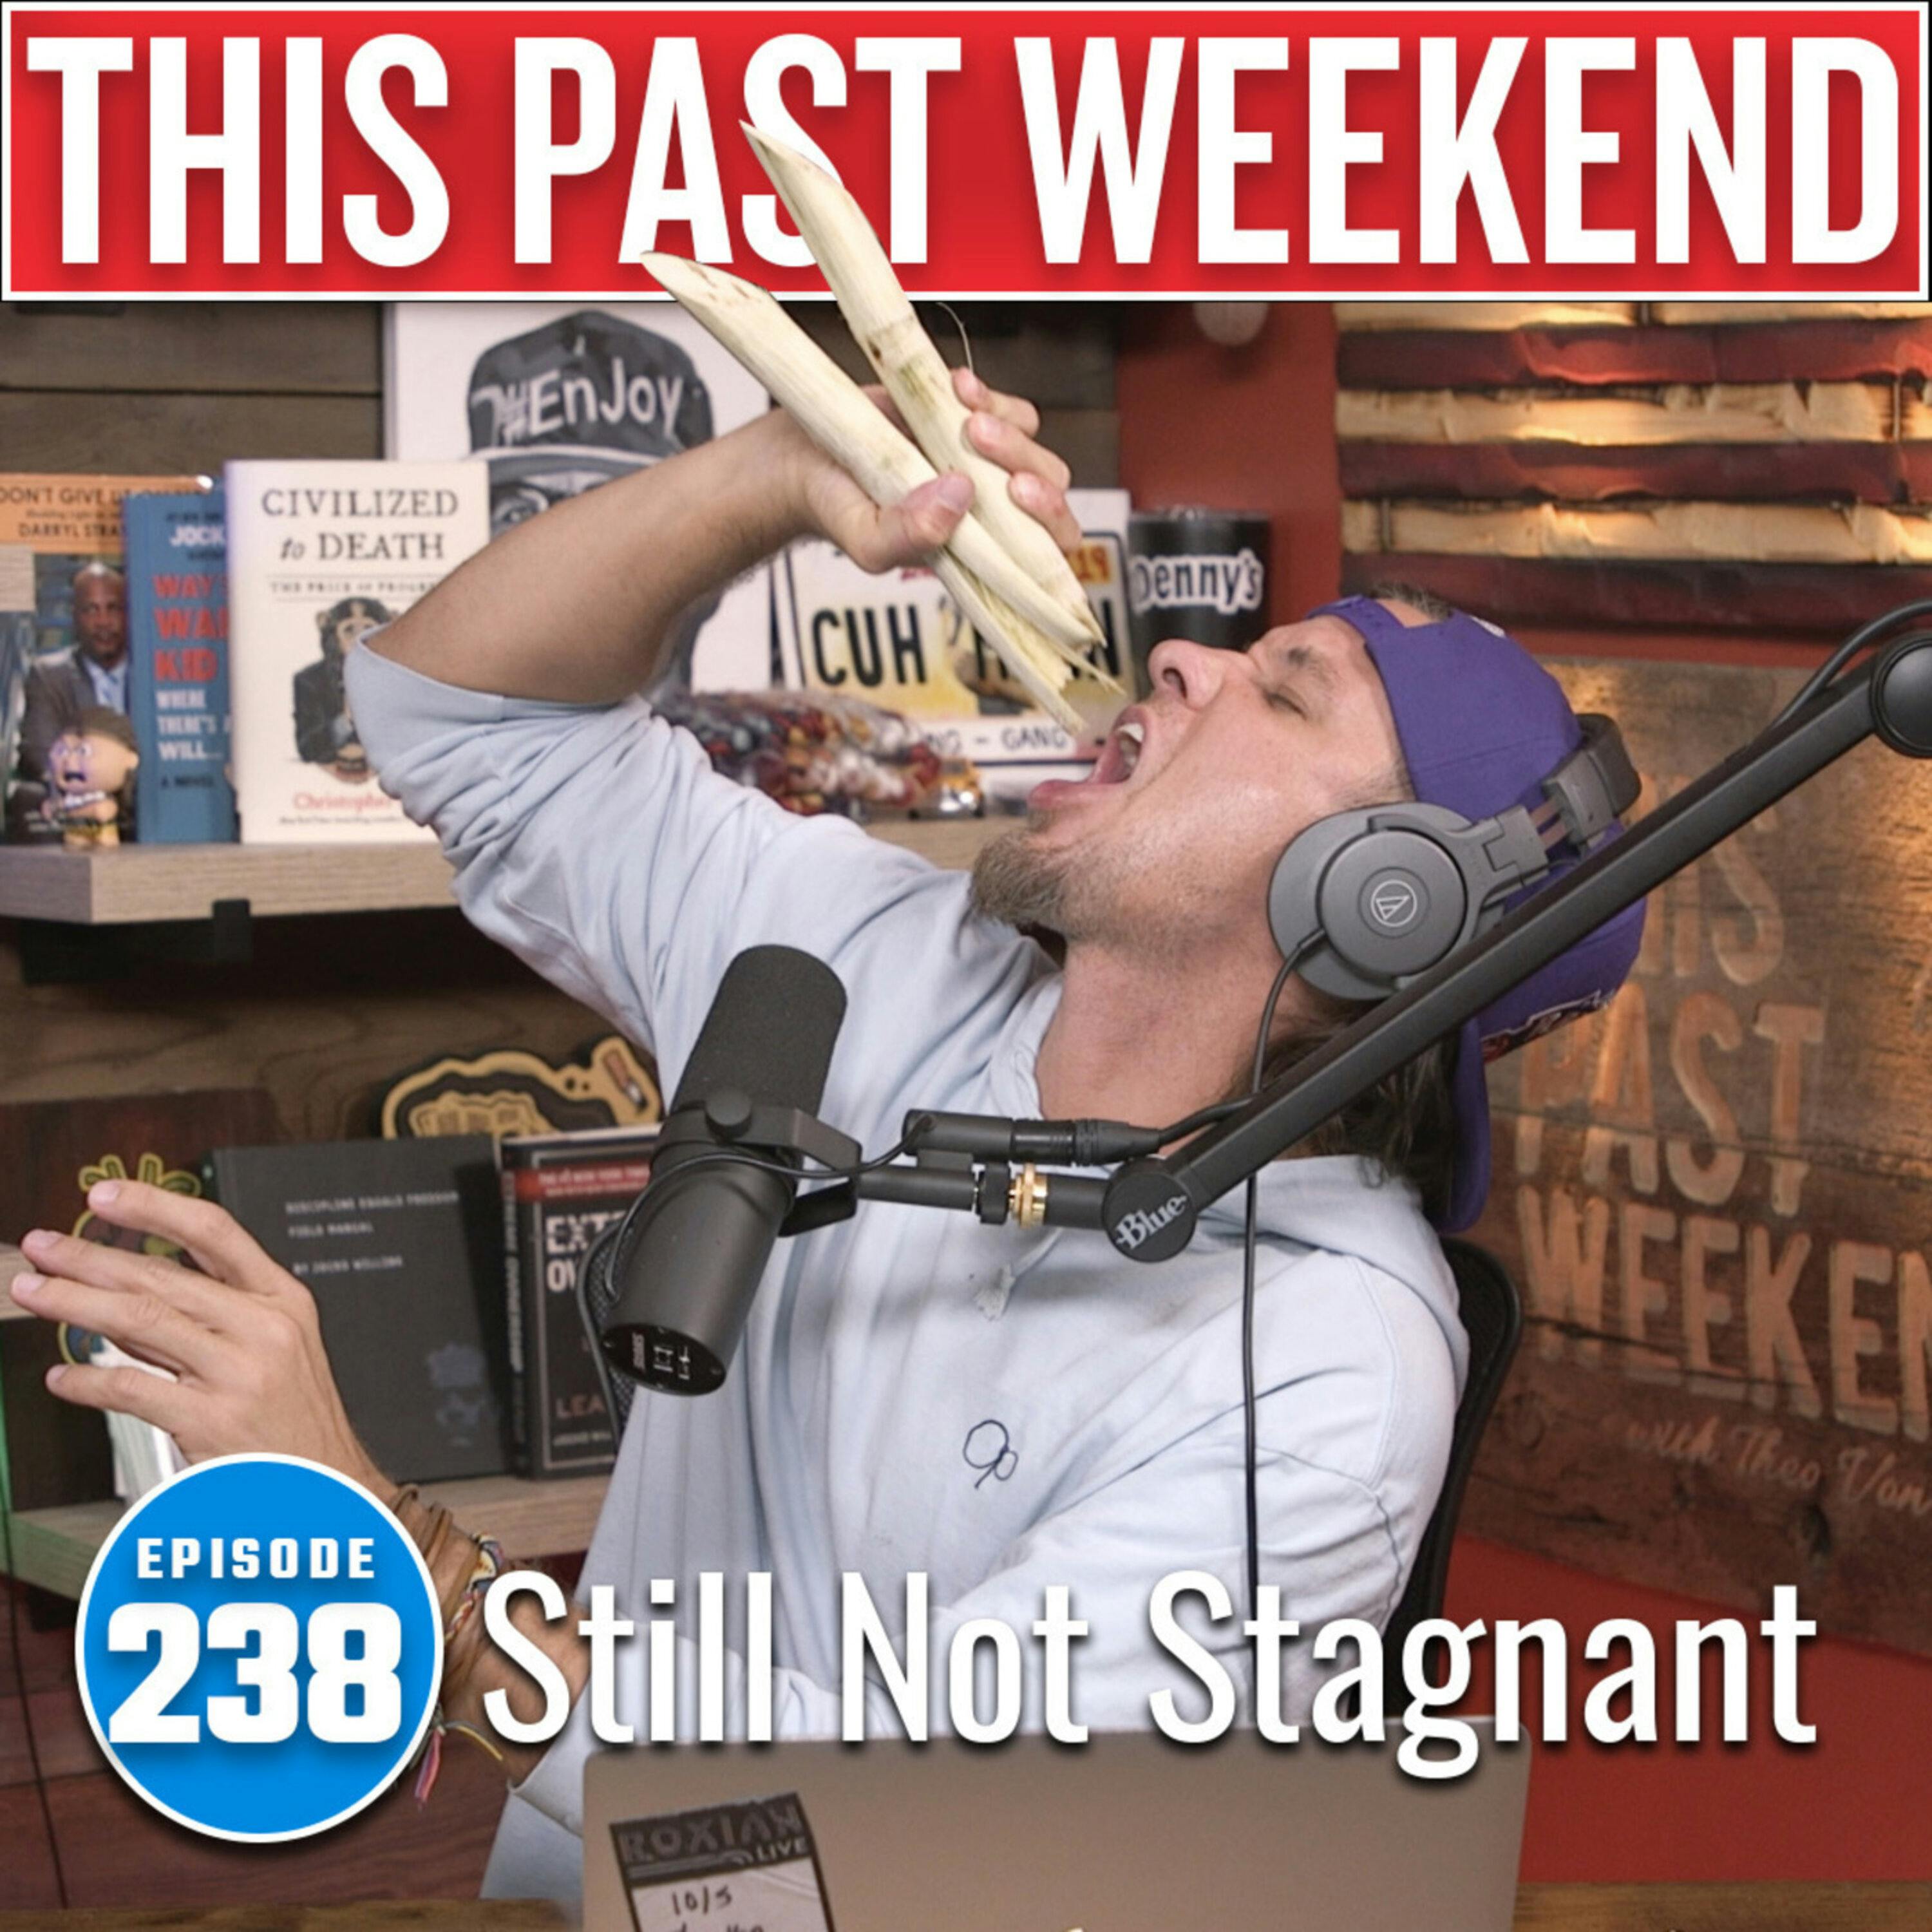 Jay Mohr 2 | This Past Weekend #239